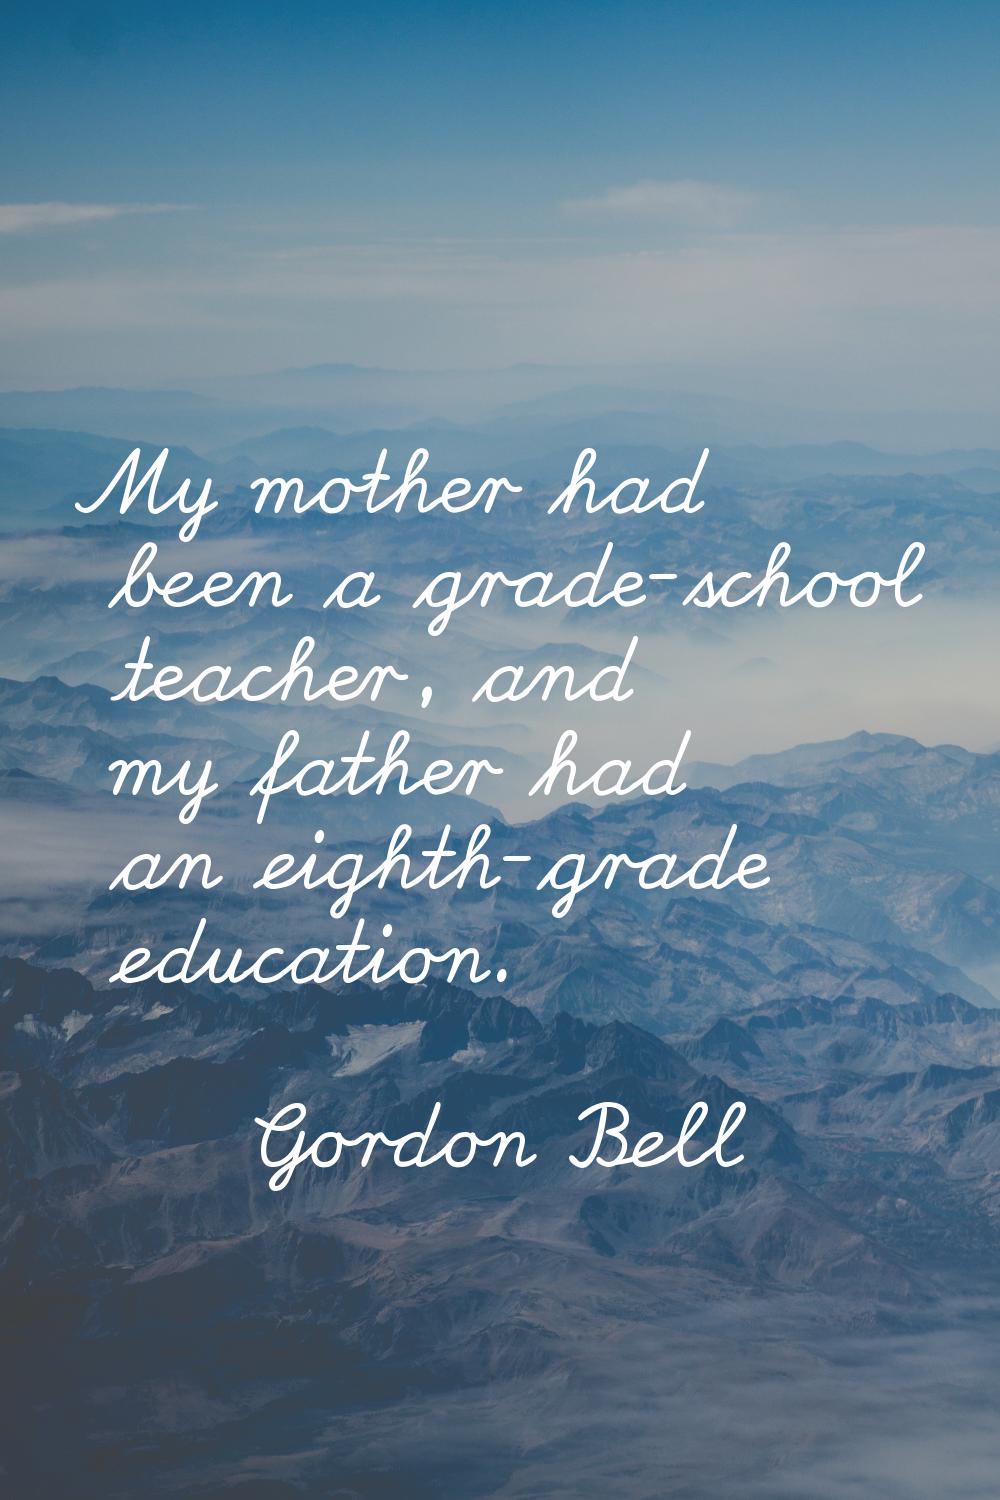 My mother had been a grade-school teacher, and my father had an eighth-grade education.